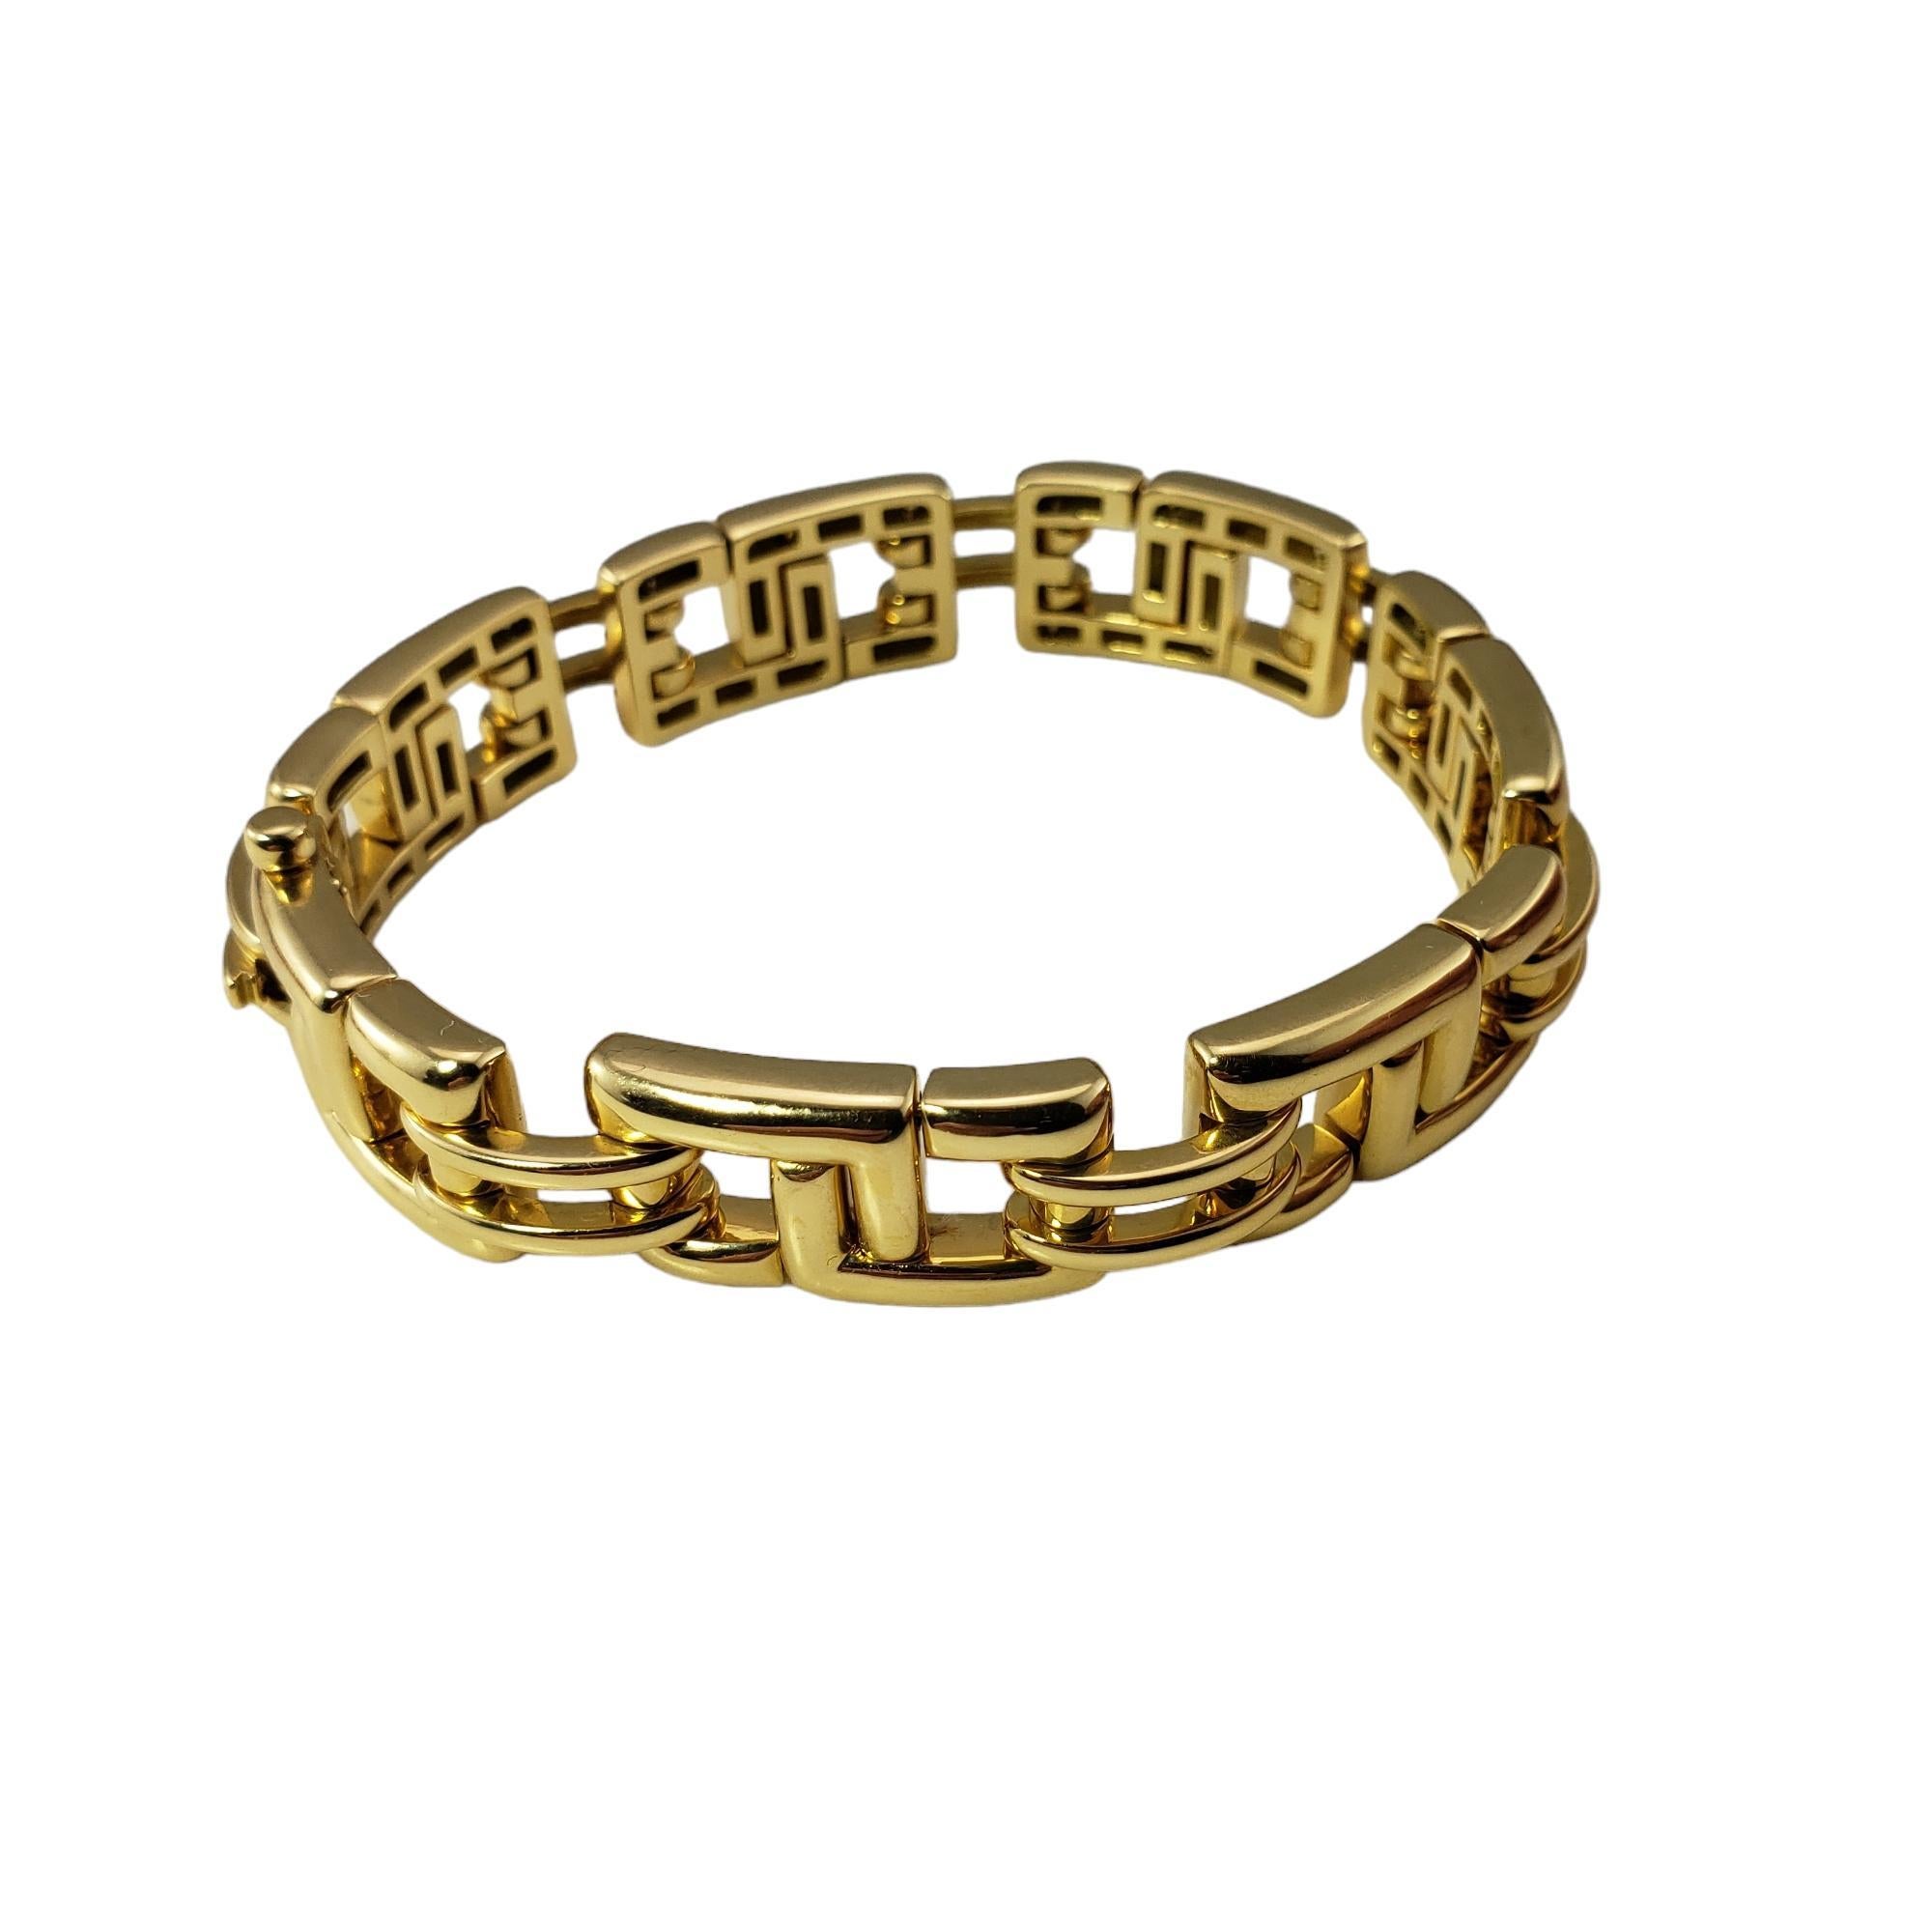 Tiffany & Co. 18 Karat Yellow Gold Biscayne Bracelet #16626 In Good Condition For Sale In Washington Depot, CT